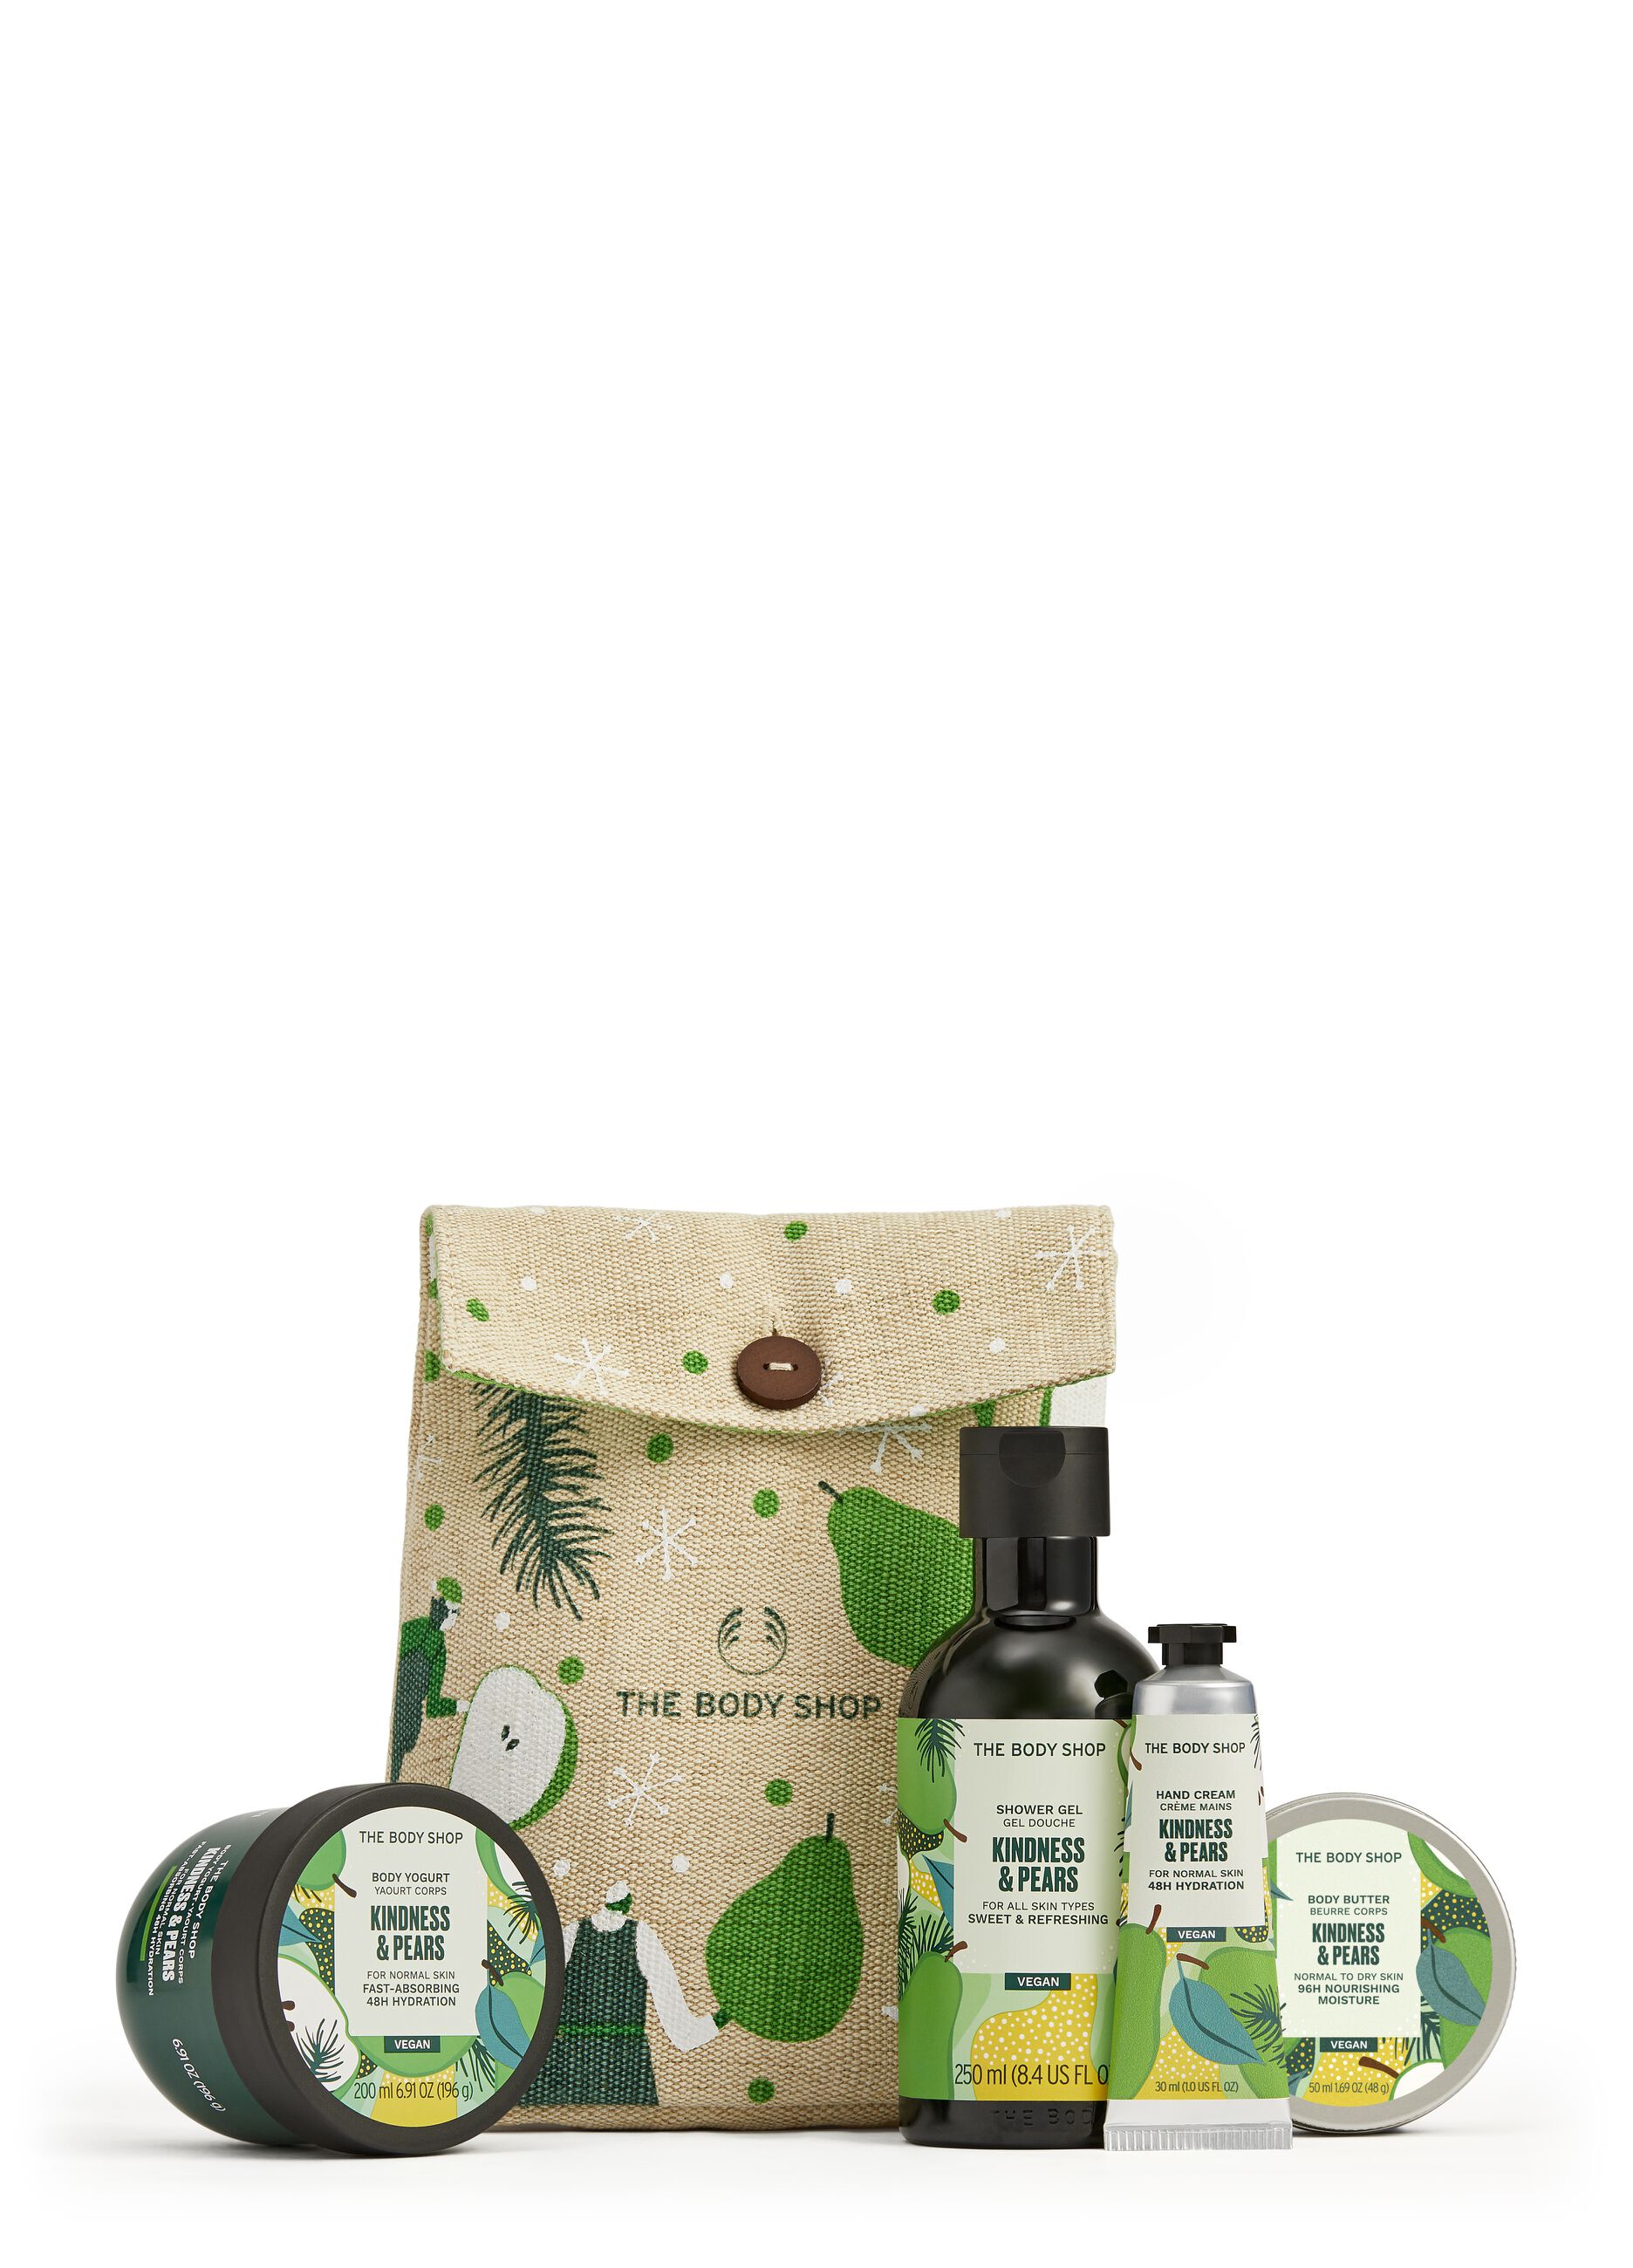 The Body Shop Kindness & Pears small gift box